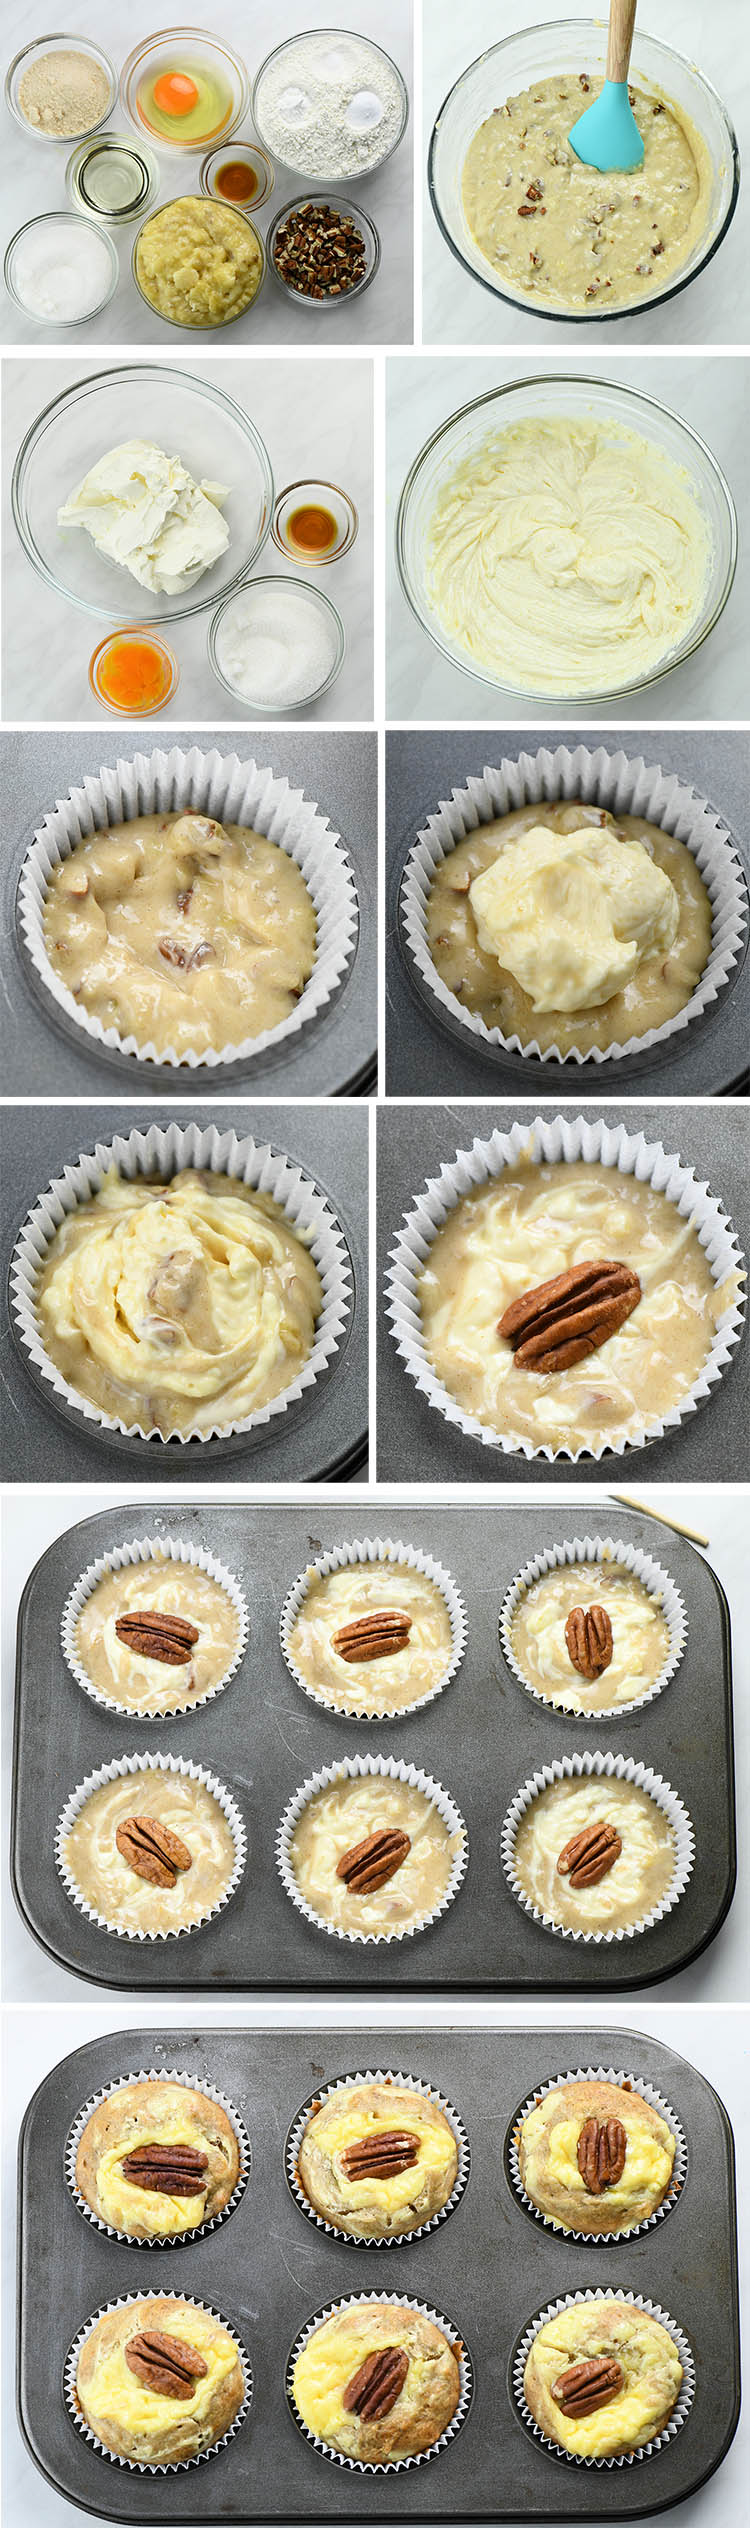 Banana Cream Cheese Muffins  step-by-step instructions.